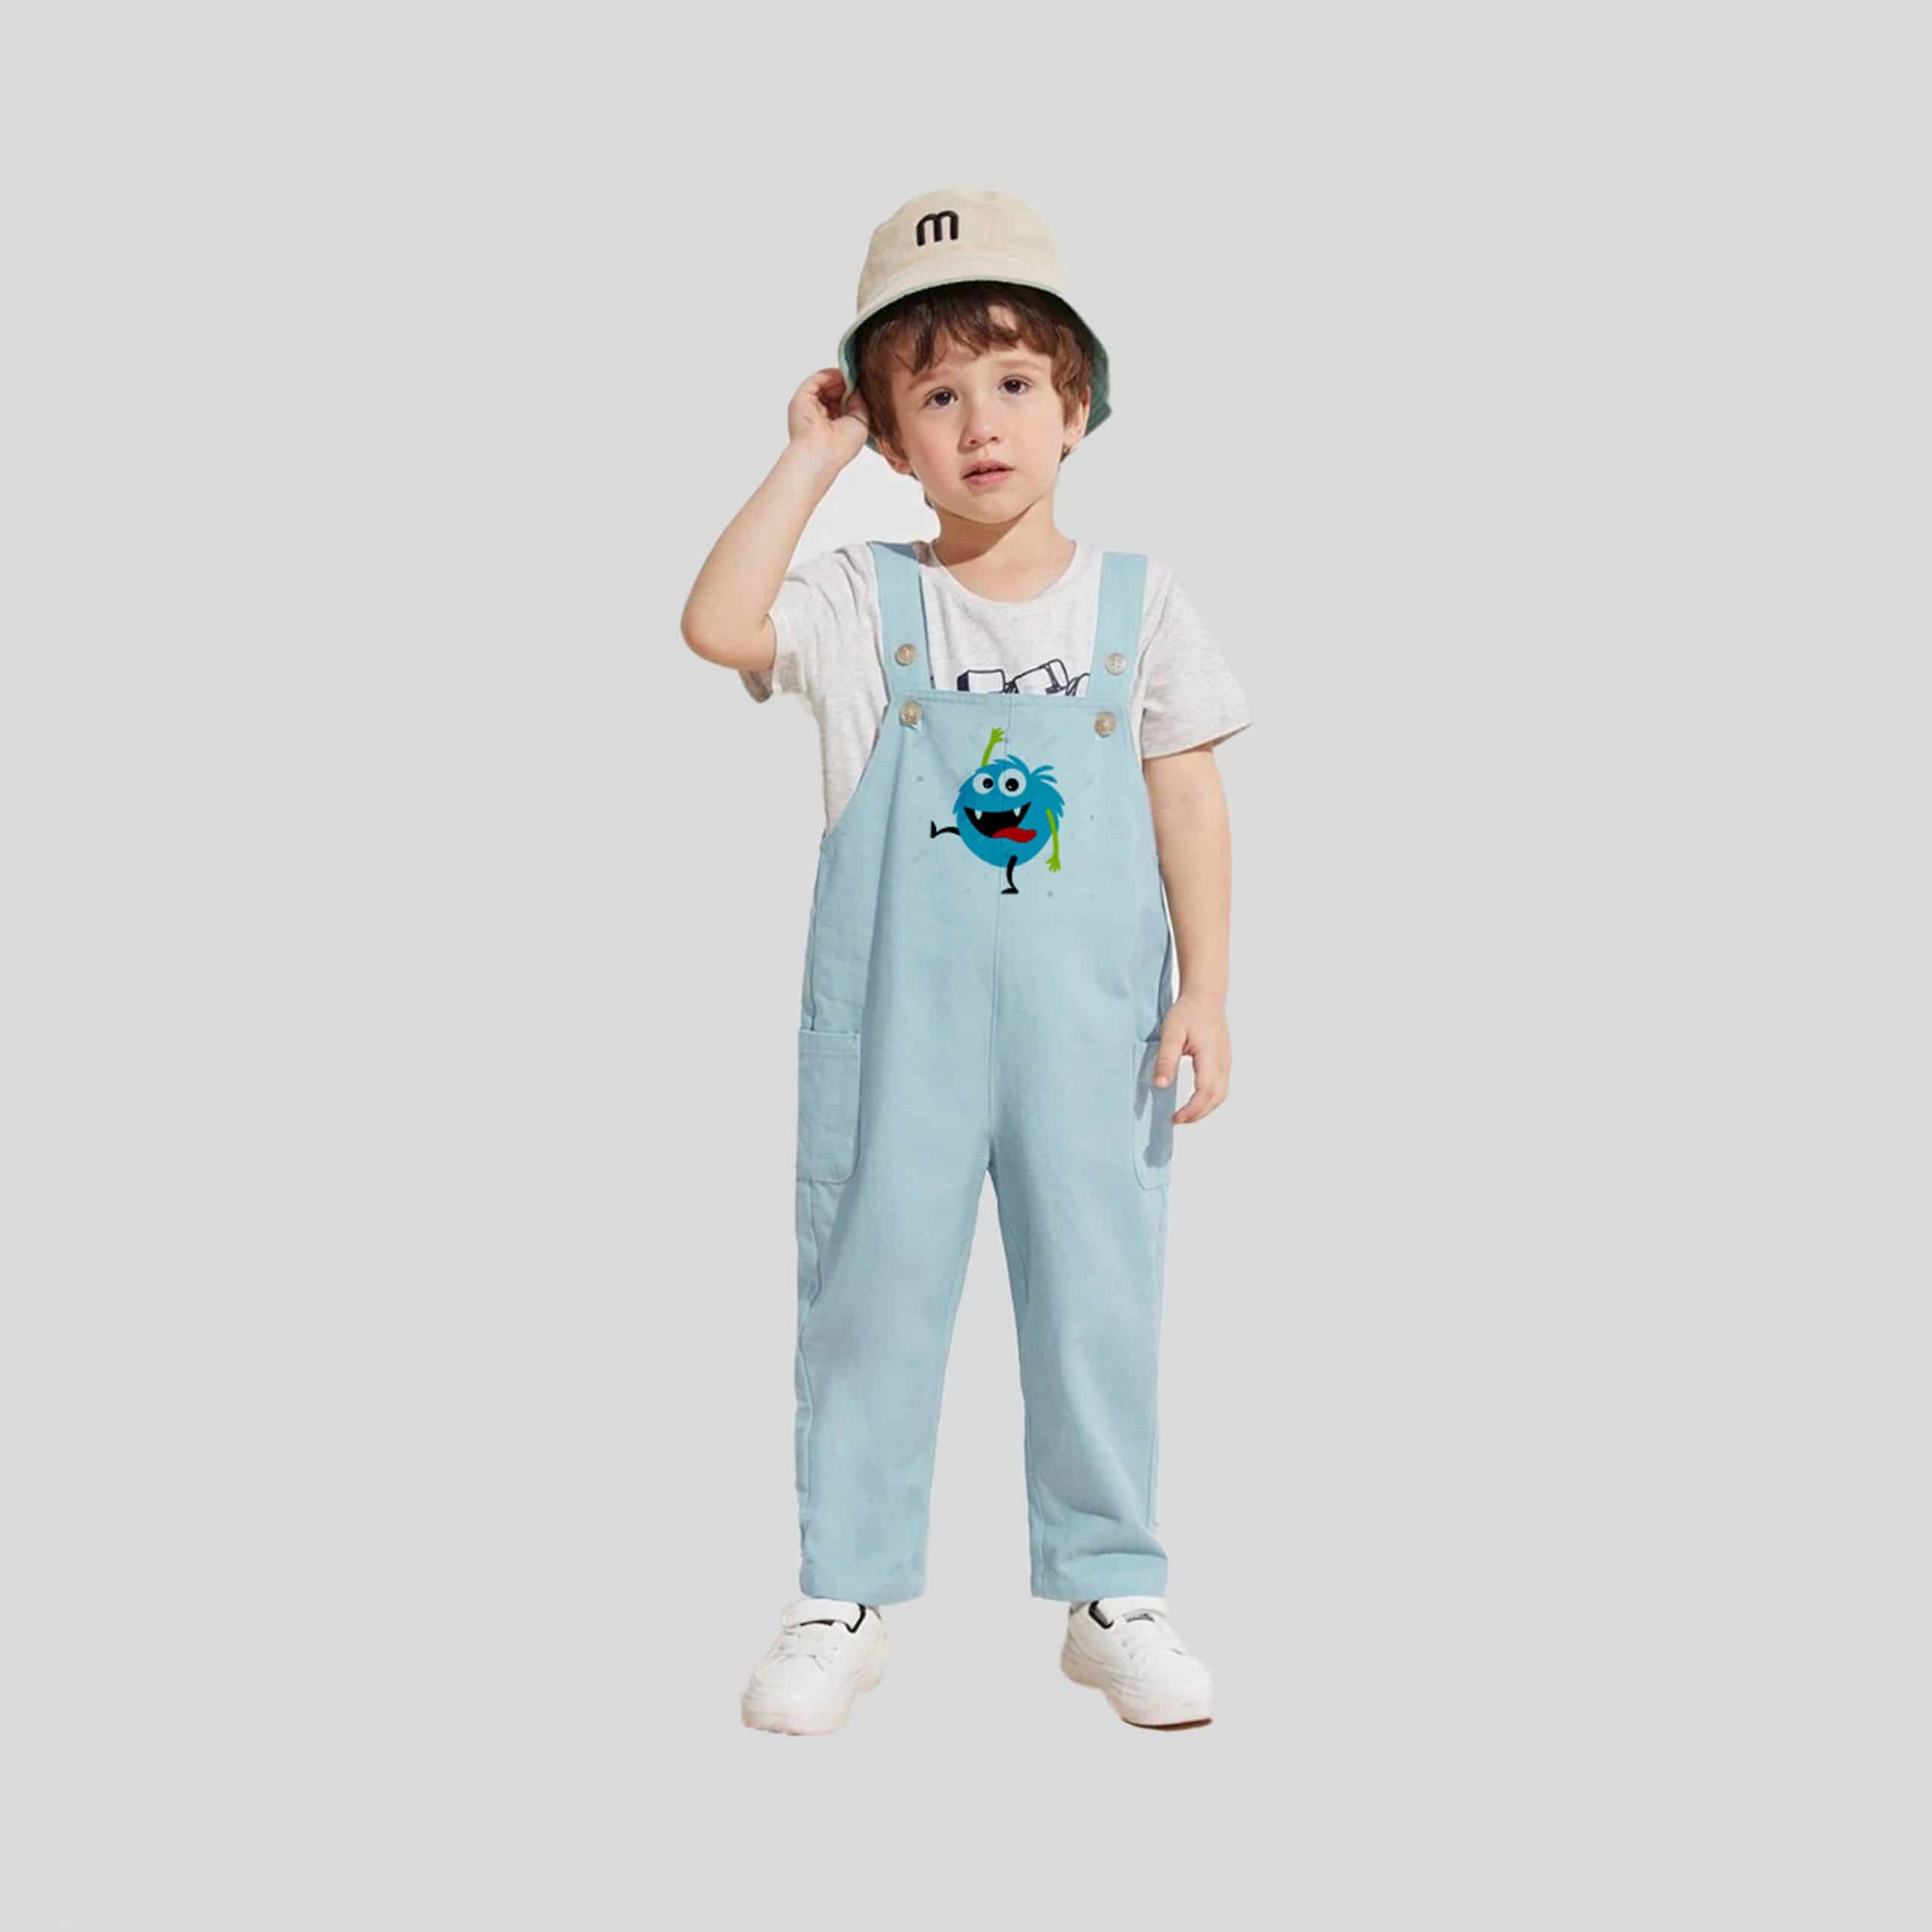 Boys Blue Dungarees with Cute Print Details - RKFCW188